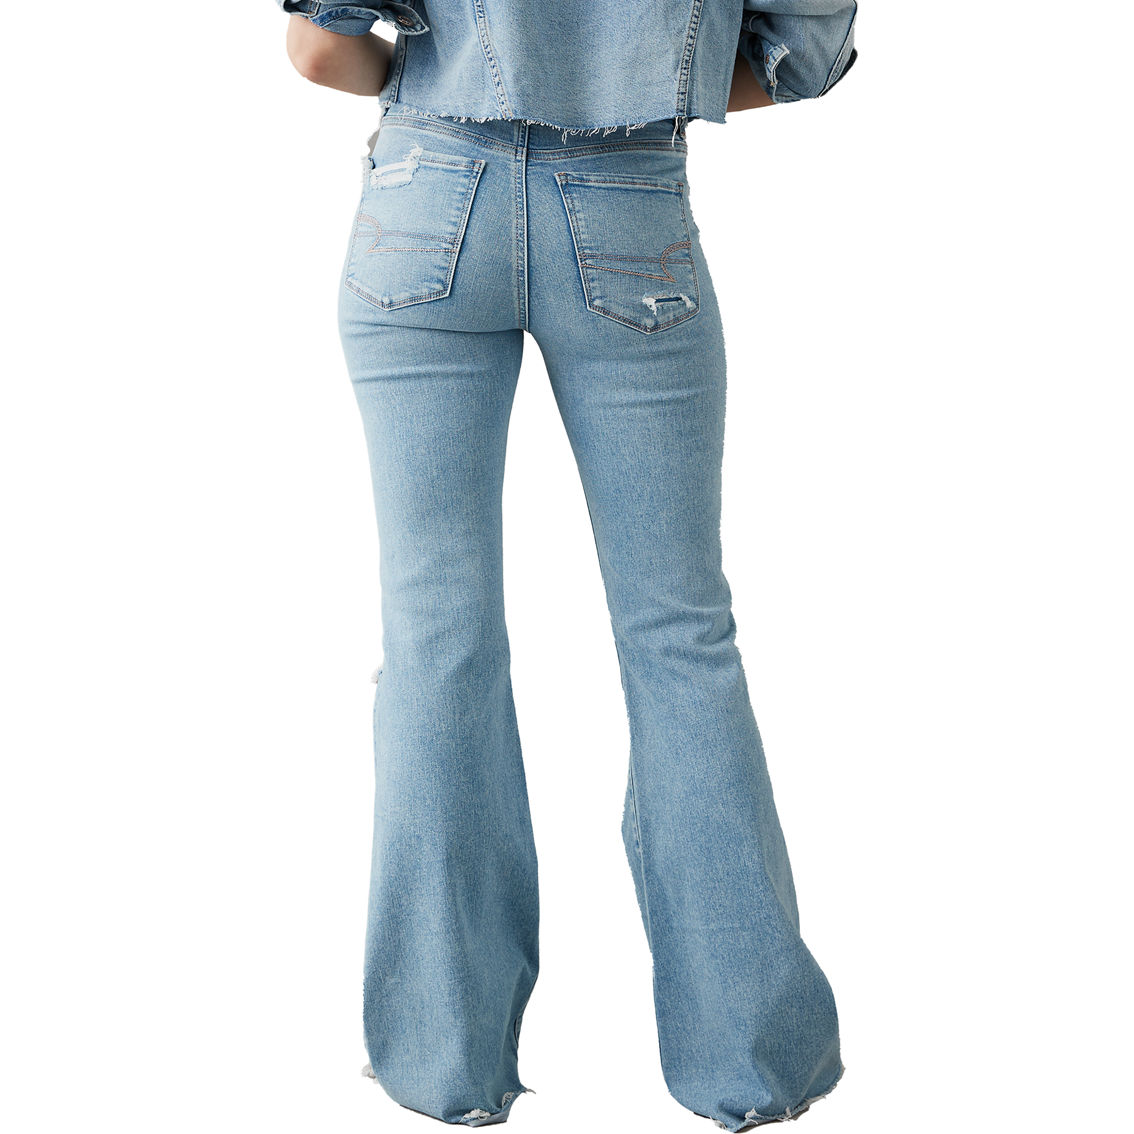 American Eagle Next Level Ripped High Rise Flare Jeans - Image 2 of 5